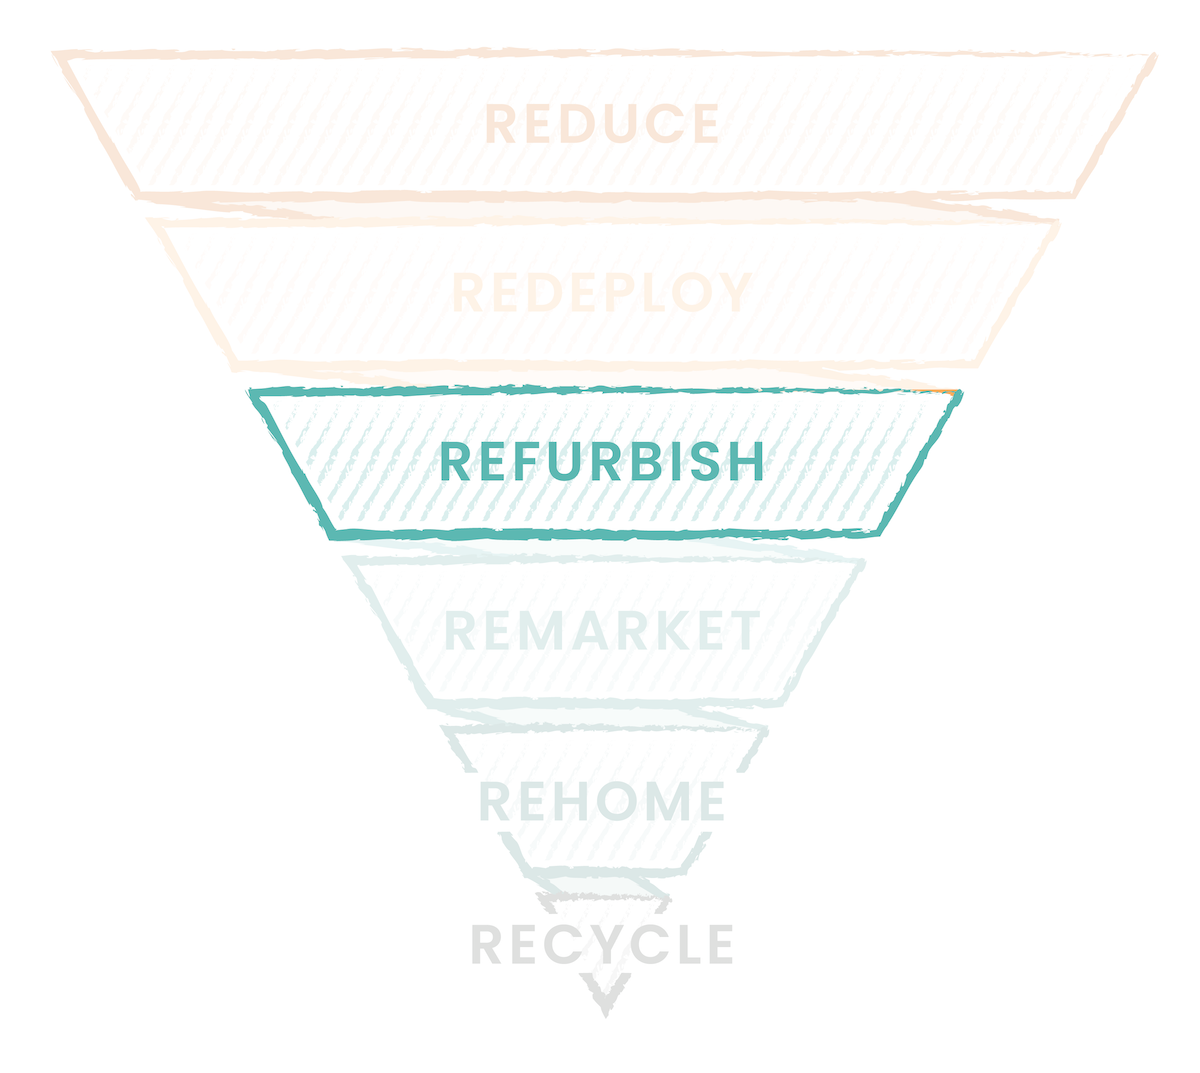 An image of an upside-down triangle shows the third layer of the technology recycle pyramid: “Refurbish”